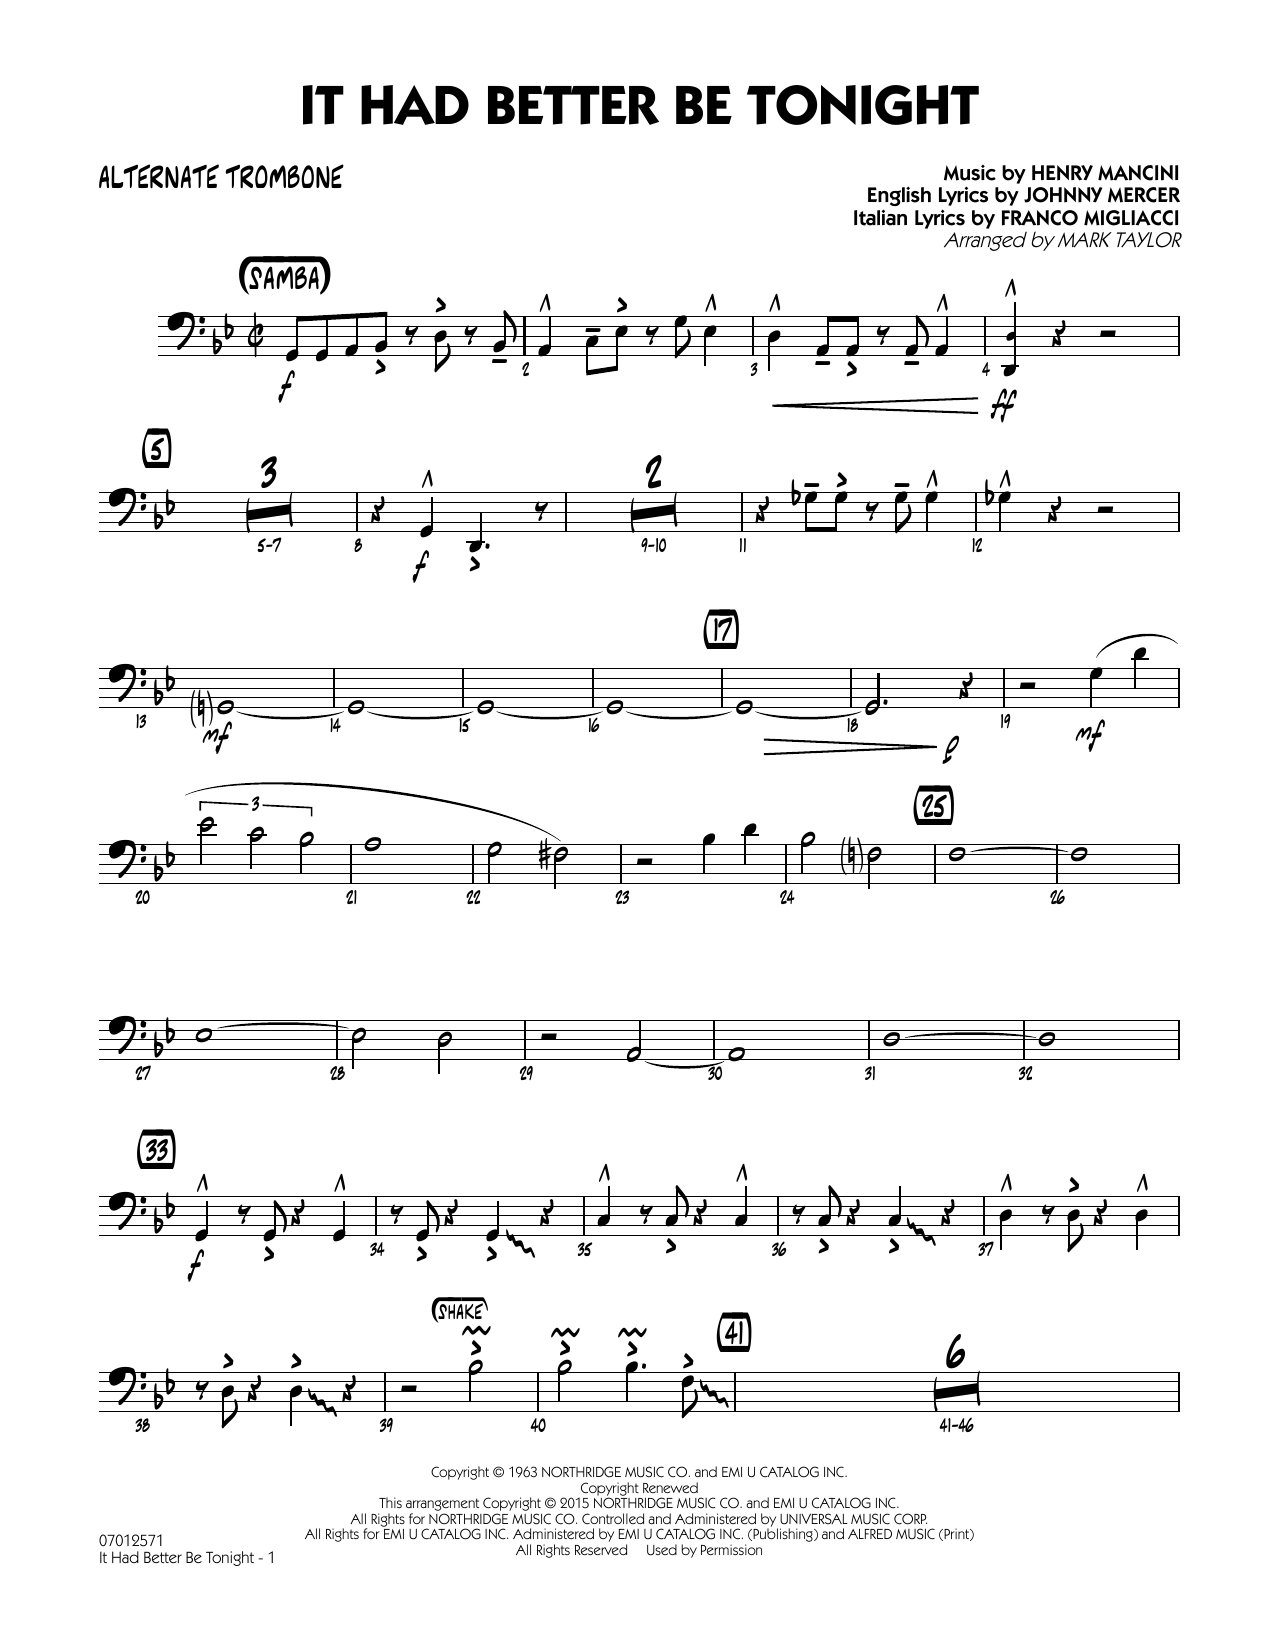 Mark Taylor It Had Better Be Tonight - Alternate Trombone sheet music notes and chords. Download Printable PDF.